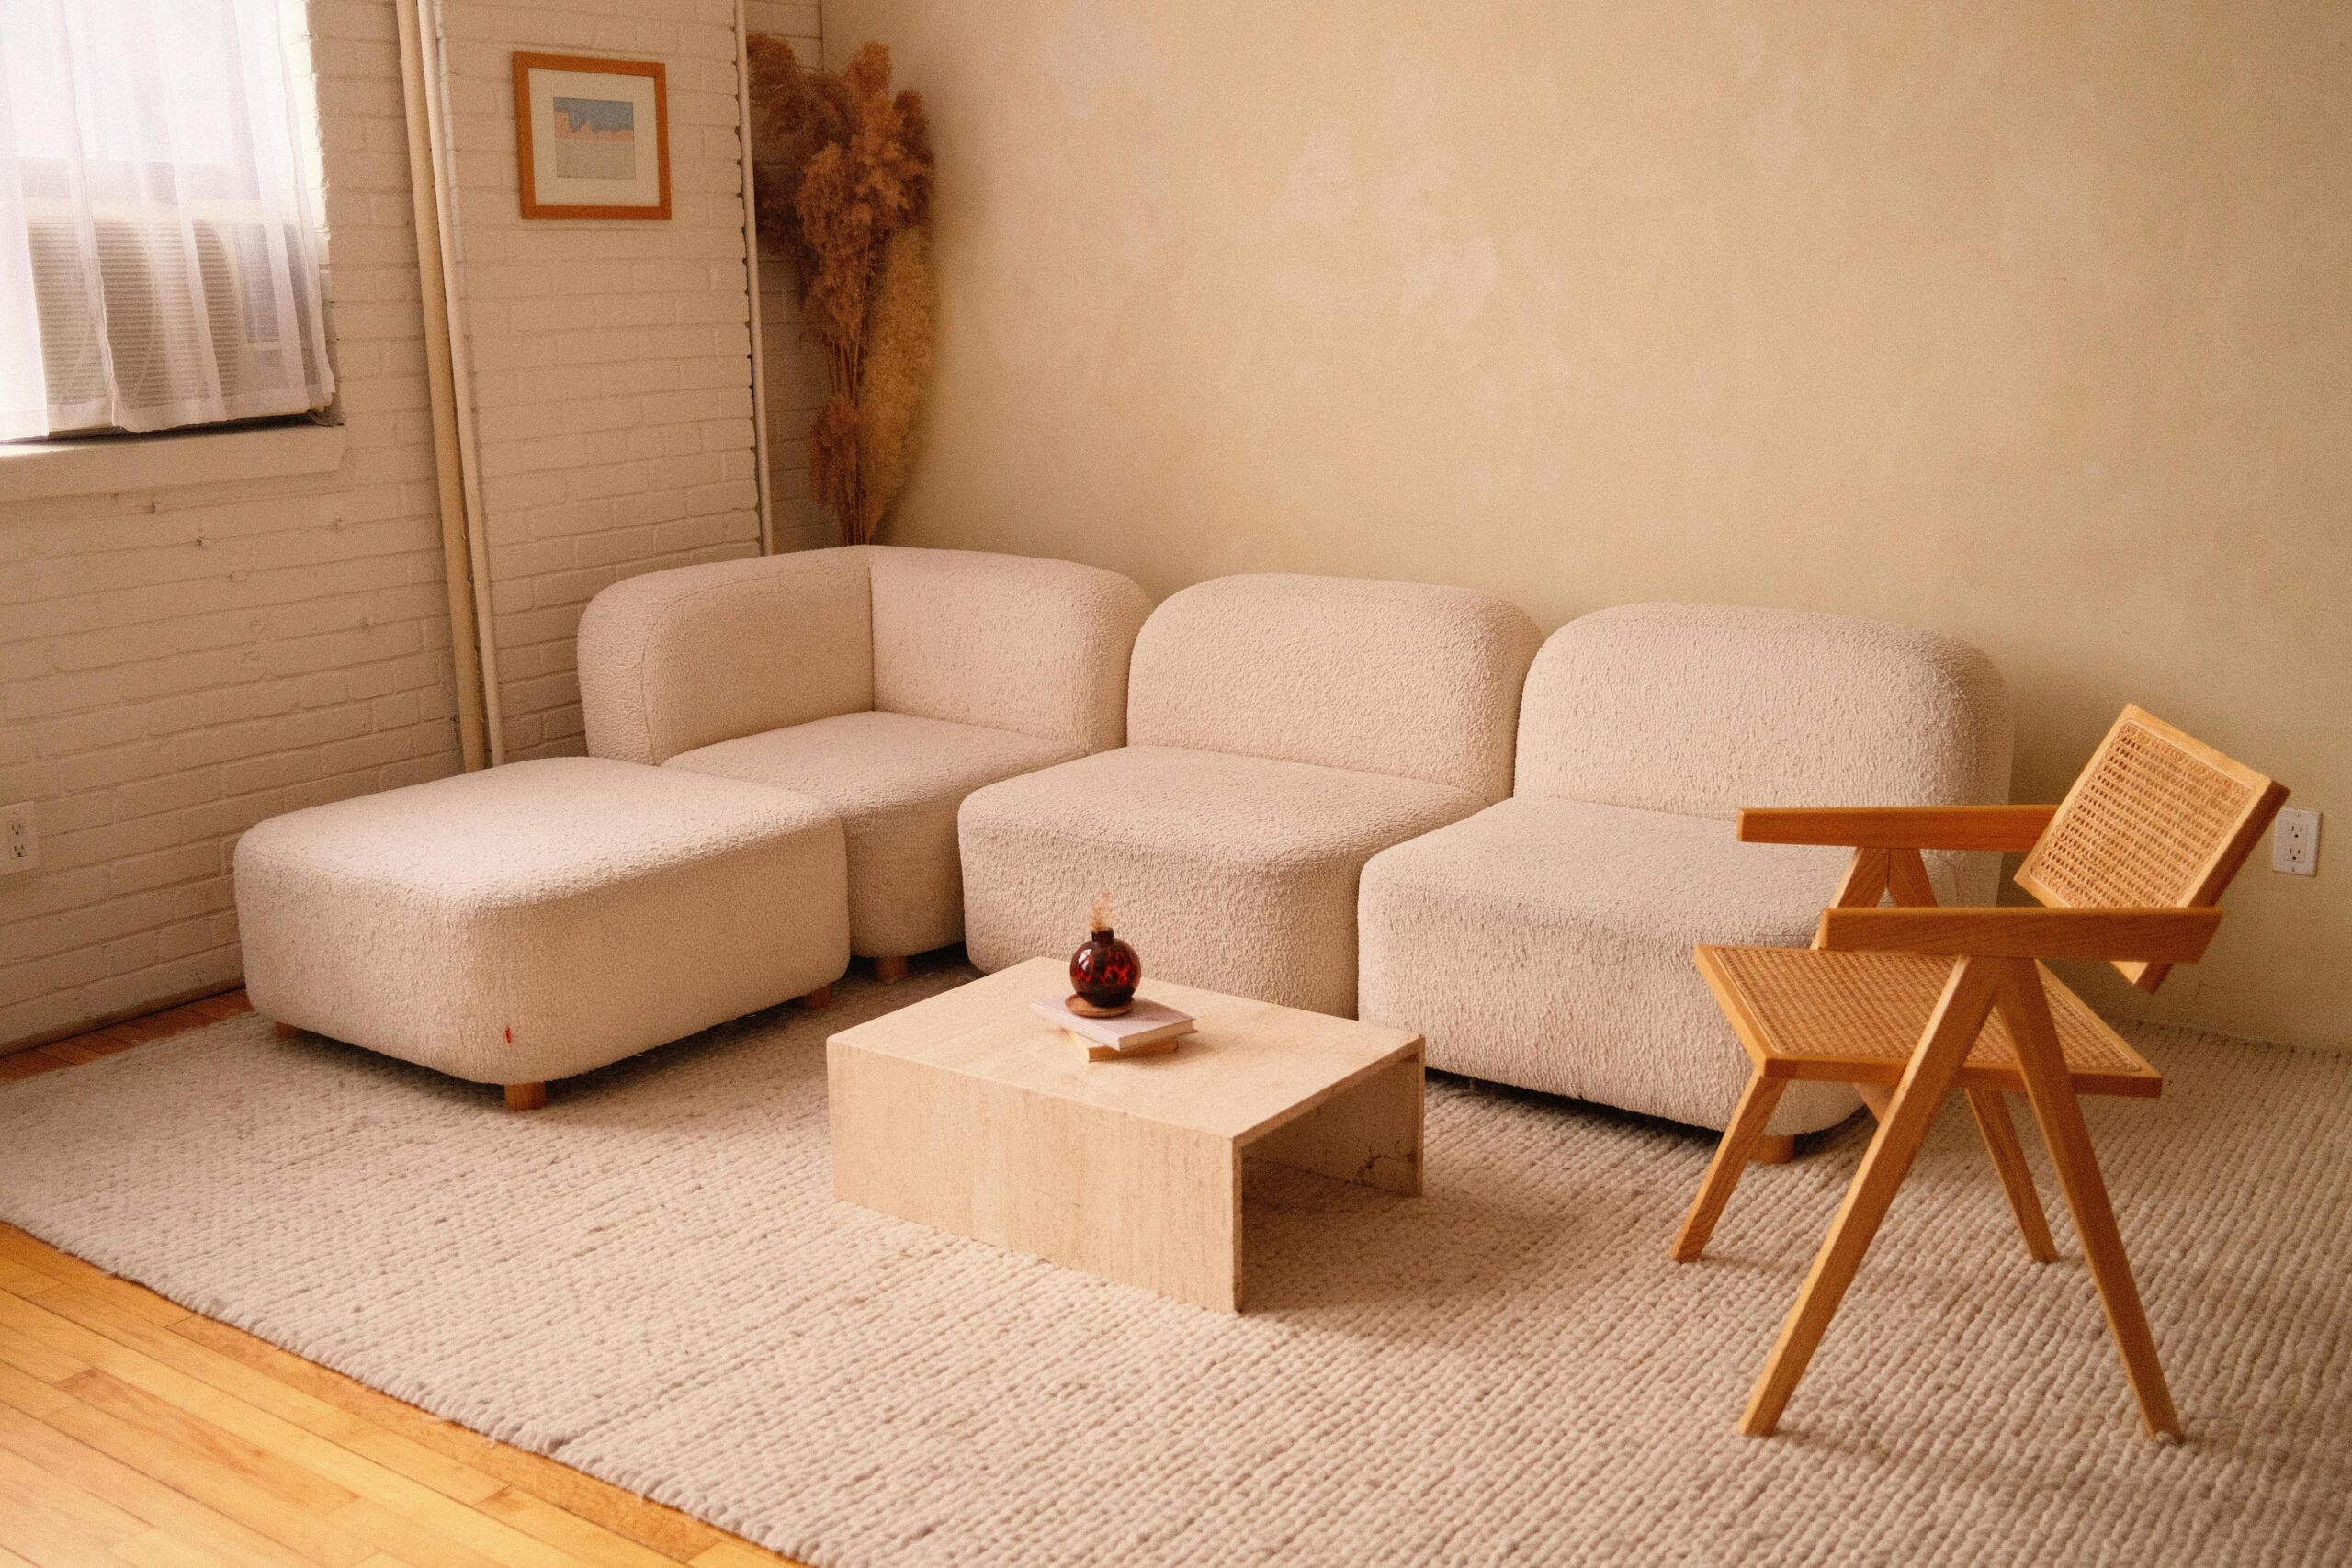 A beige living space 